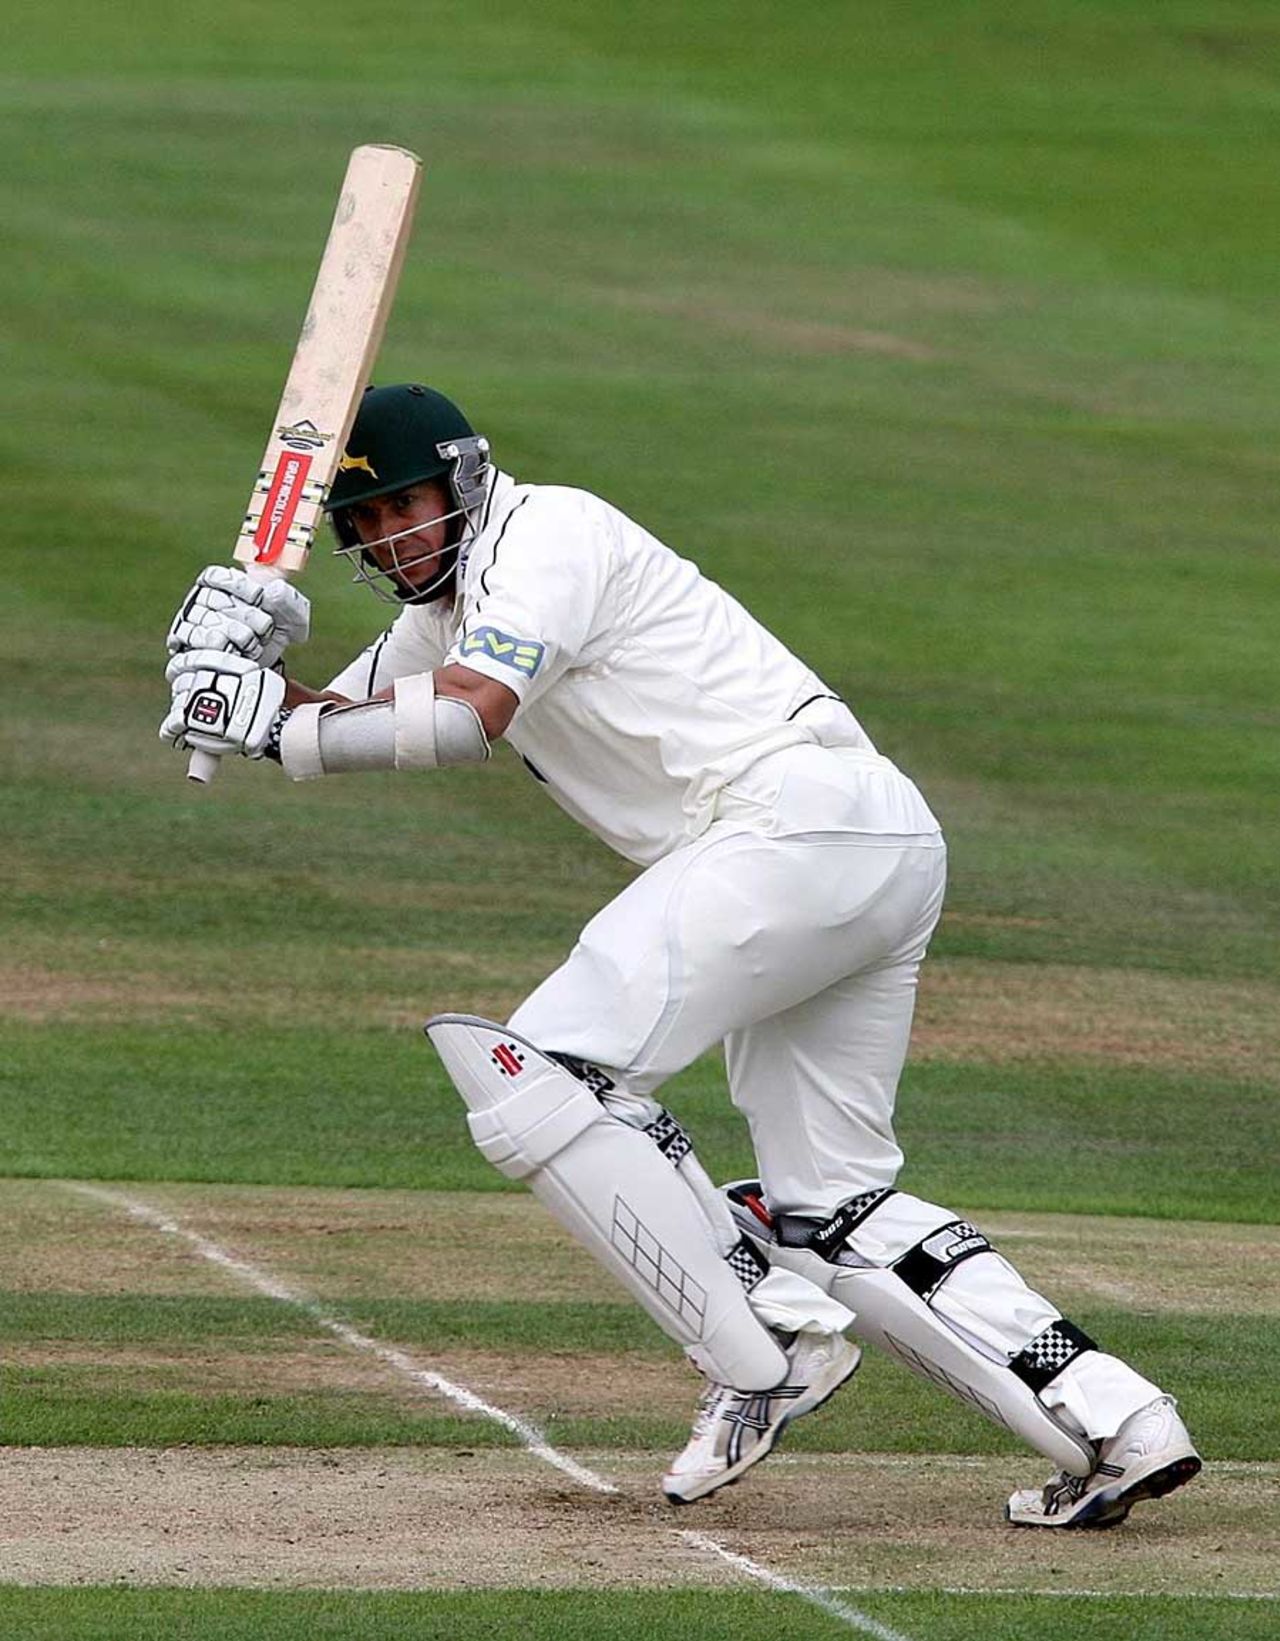 Mark Wagh collects runs through the leg side against his former county, Warwickshire v Nottinghamshire, County Championship Division One, Edgaston, July 21, 2010